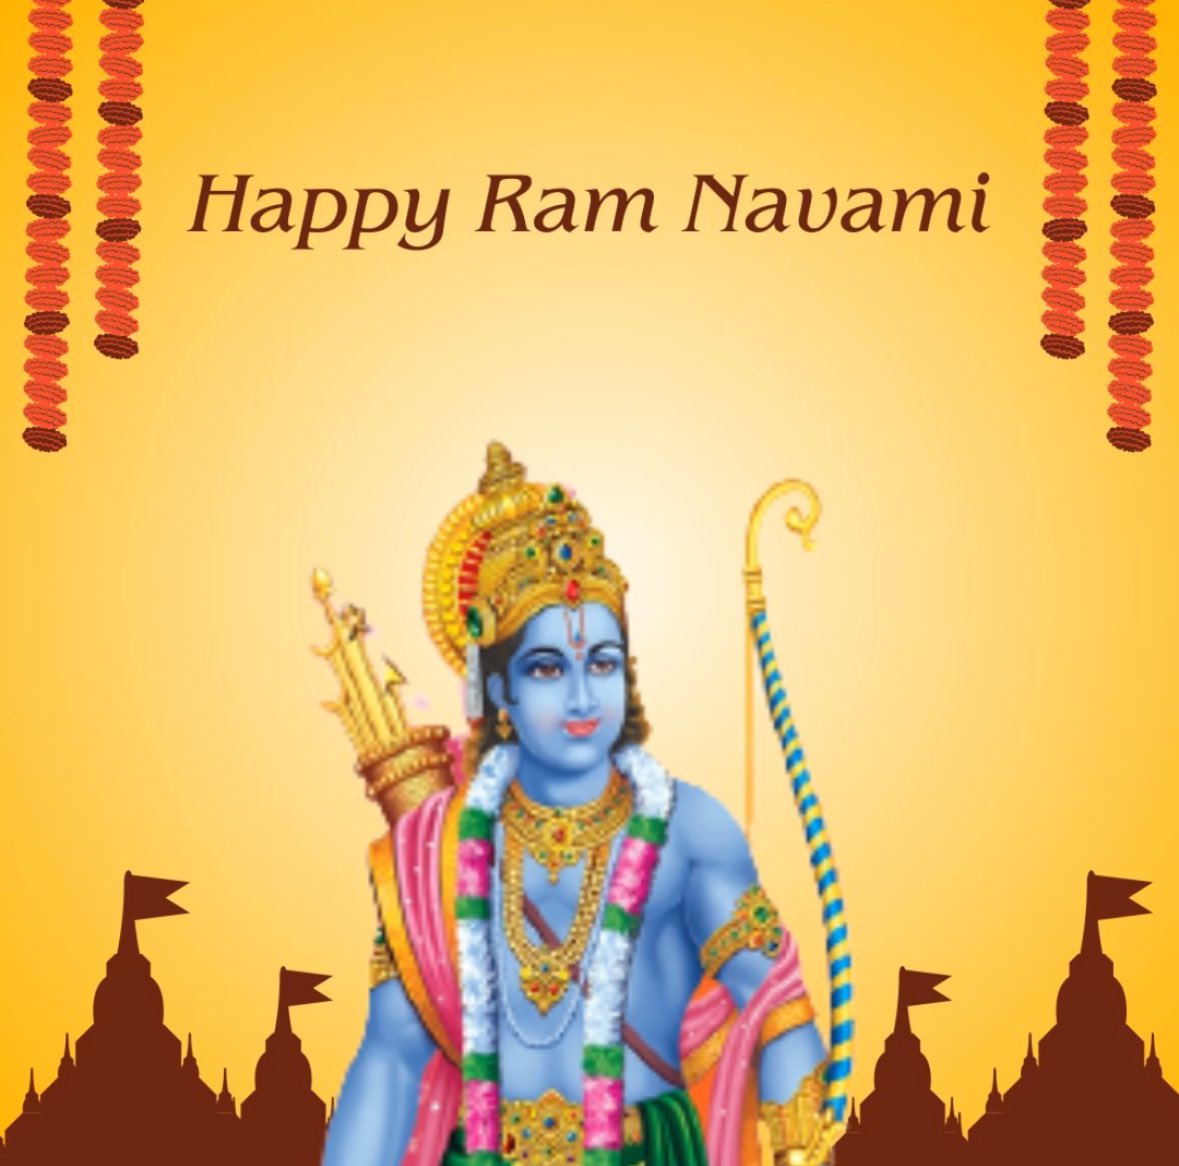 Happy Ram Navami! May this auspicious day bring light and positivity into your lives🙏🏼 #RamNavami